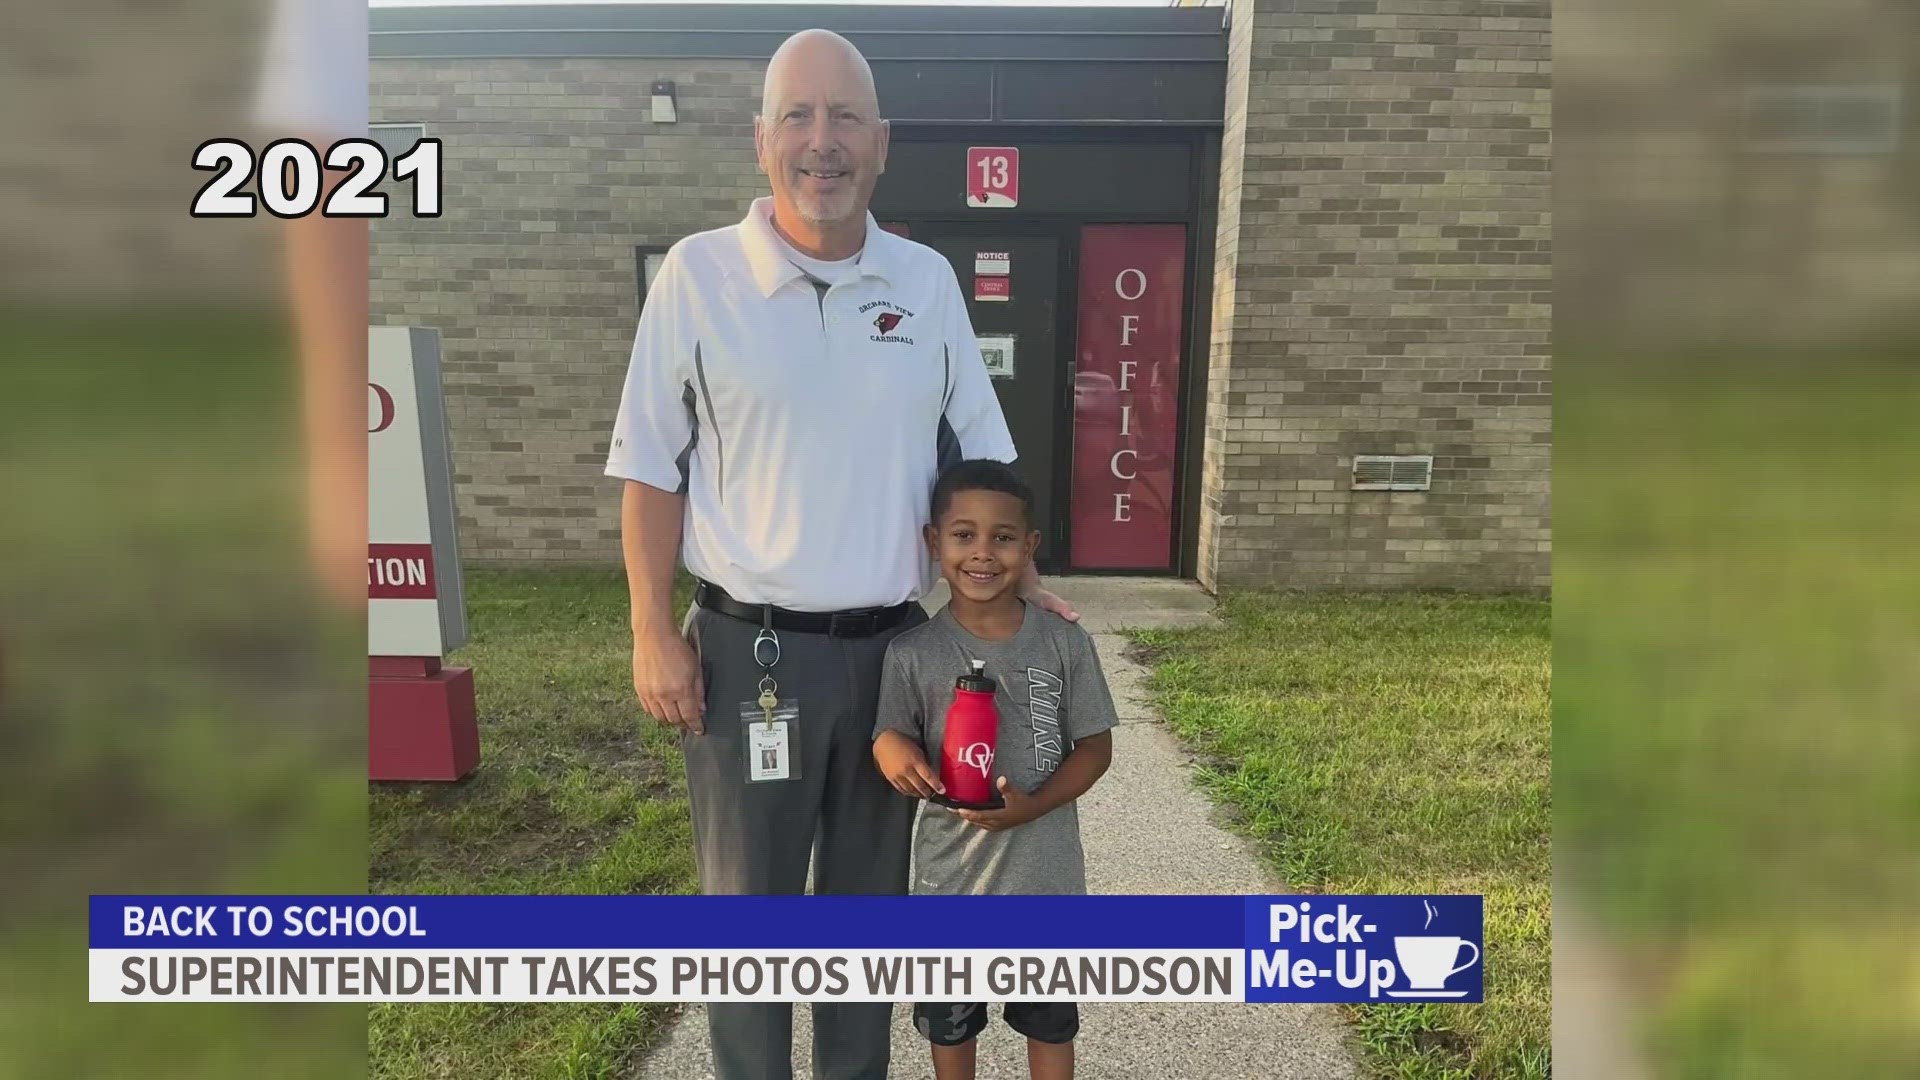 One superintendent in Muskegon County has started a tradition of taking a first day picture with his 8-year-old grandson, Quintyn.